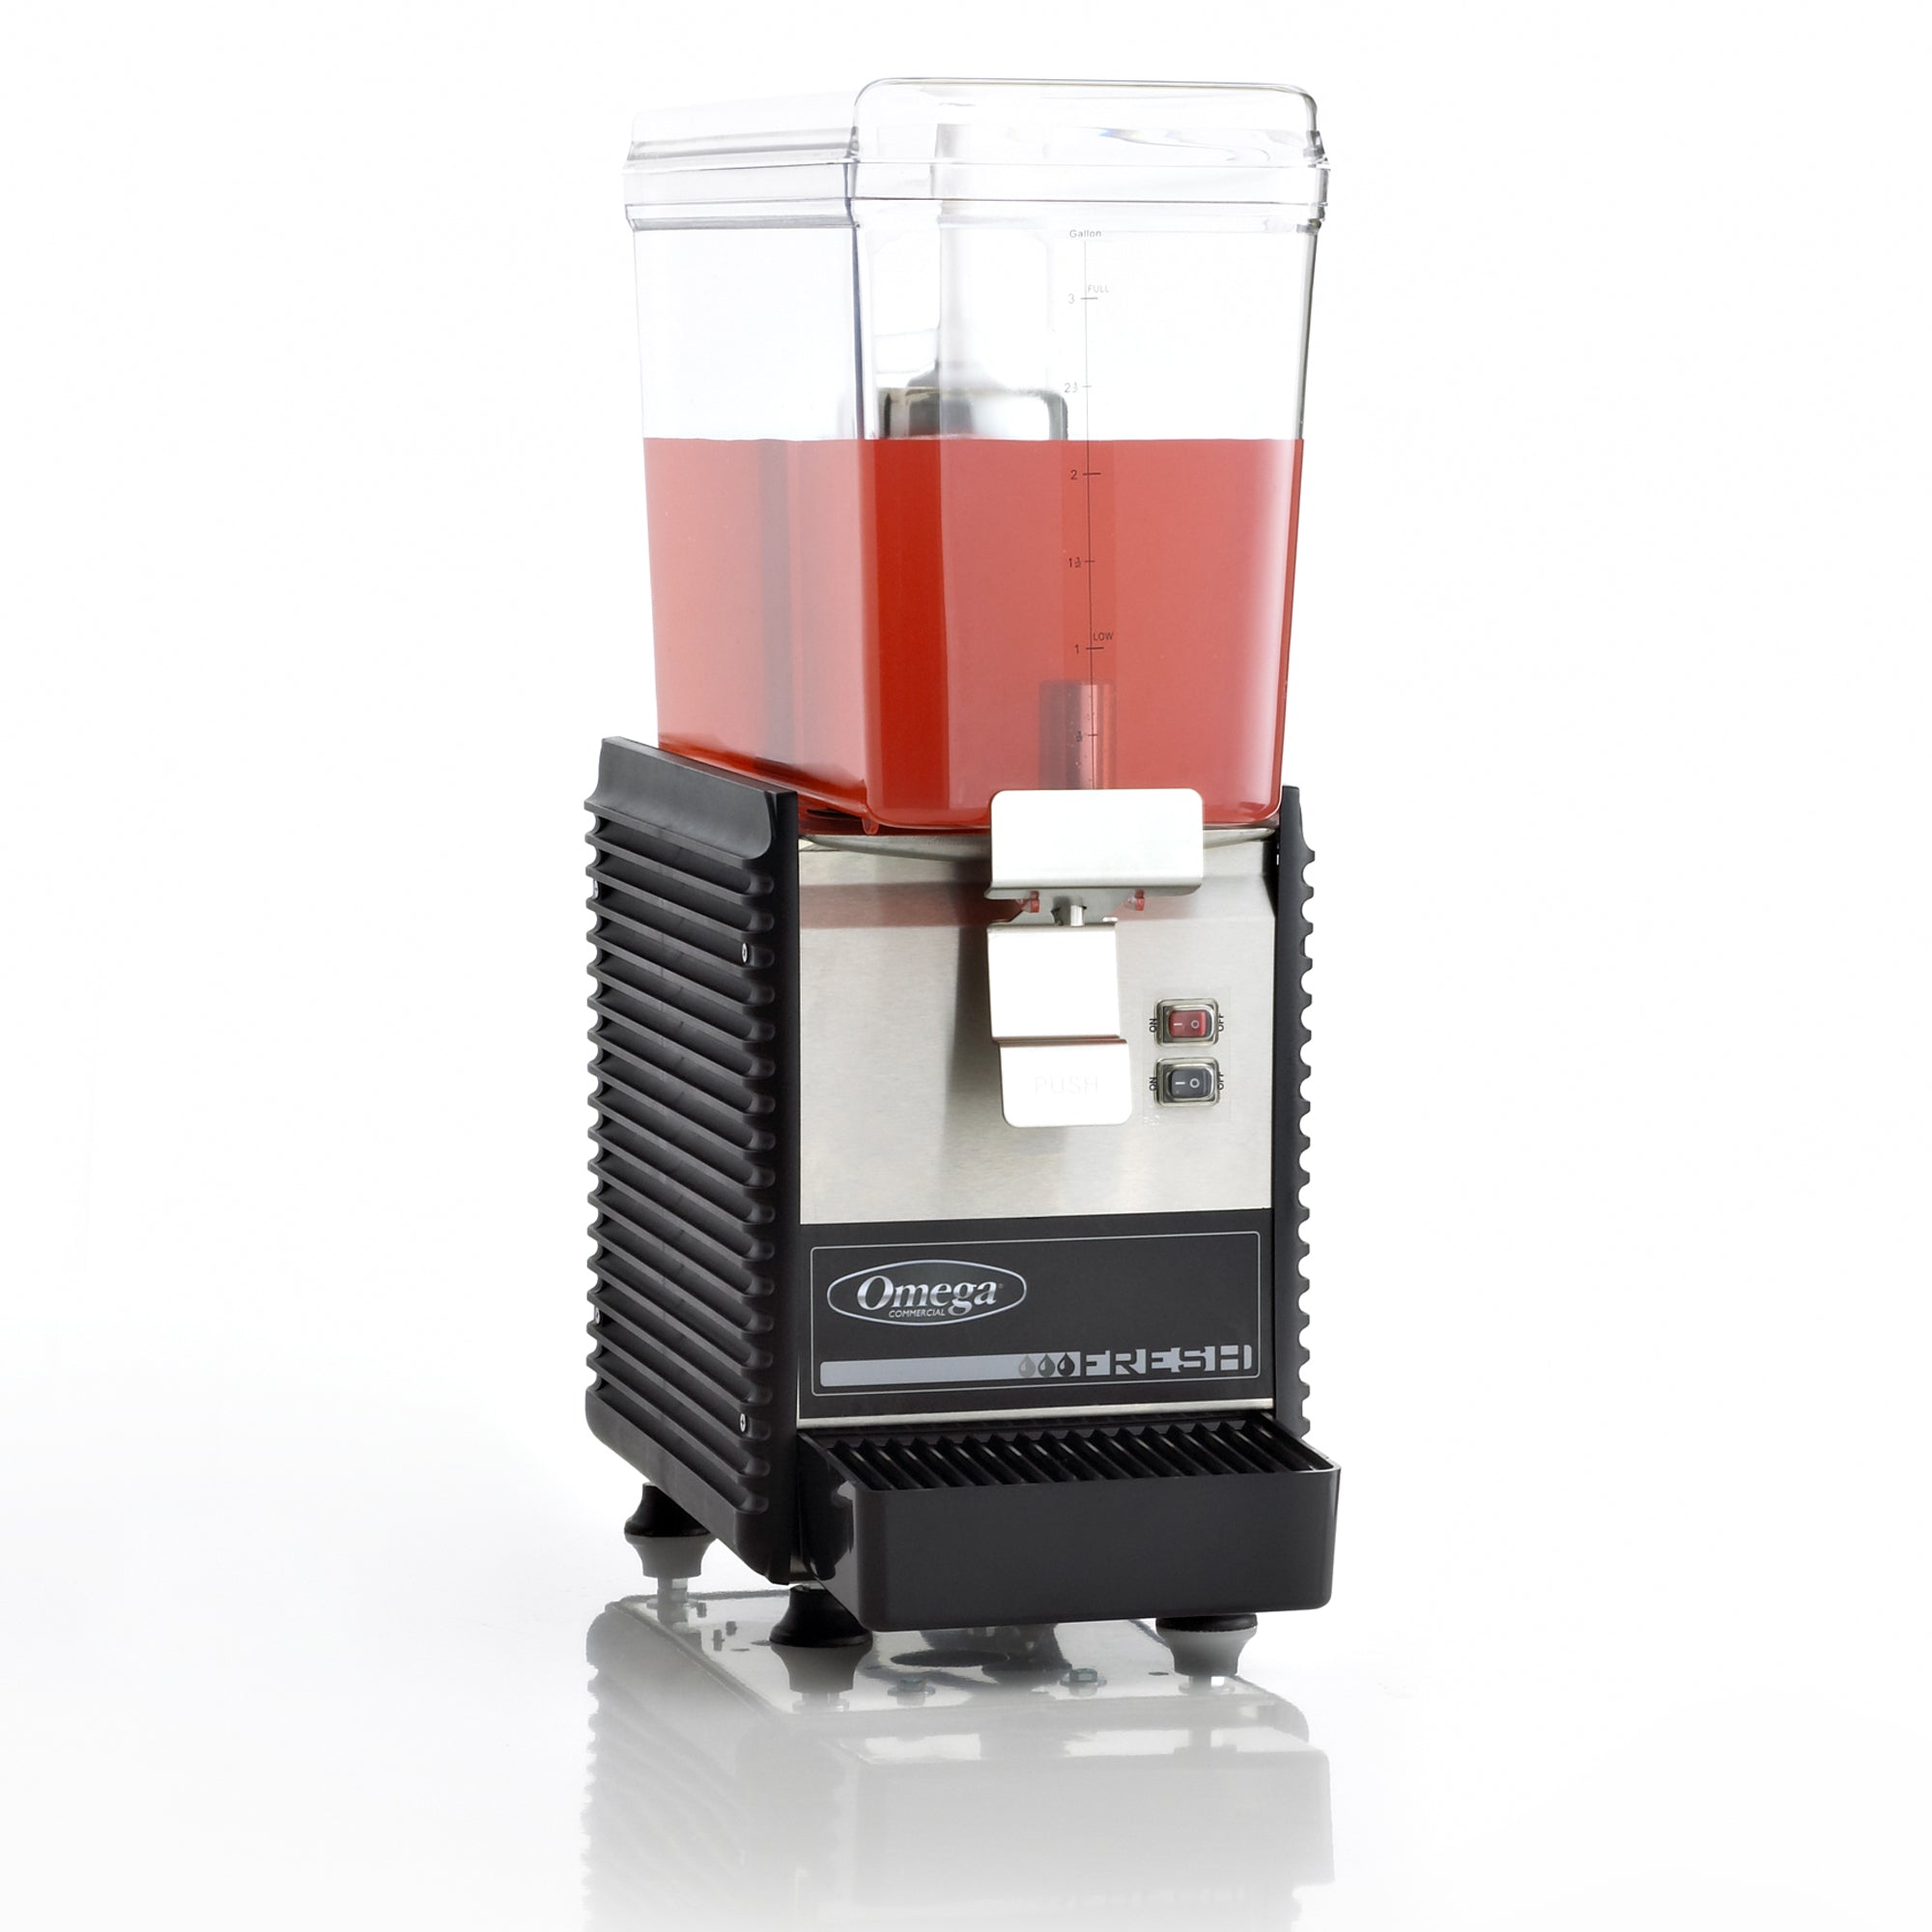 SECO: Fully automated cocktail dispenser